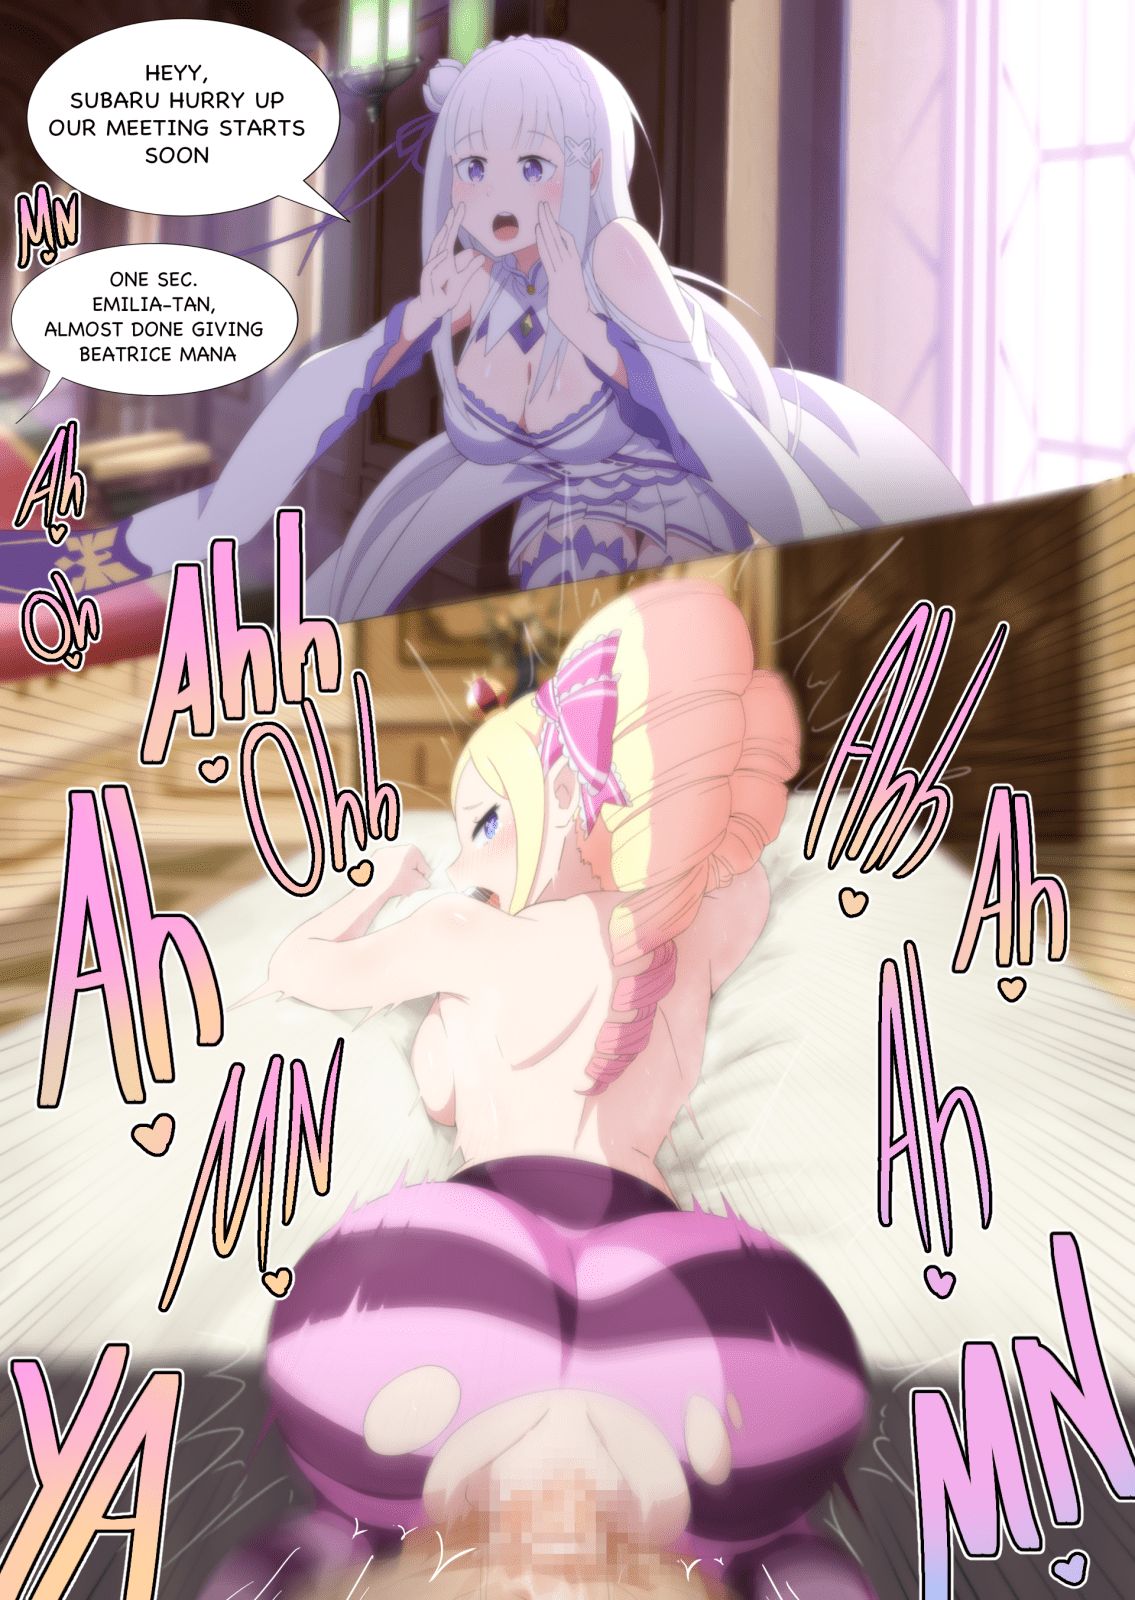 big-bitty-betty-getting-pounded-real-hard-from-behind-by-subaru-gear-art-rezero.png